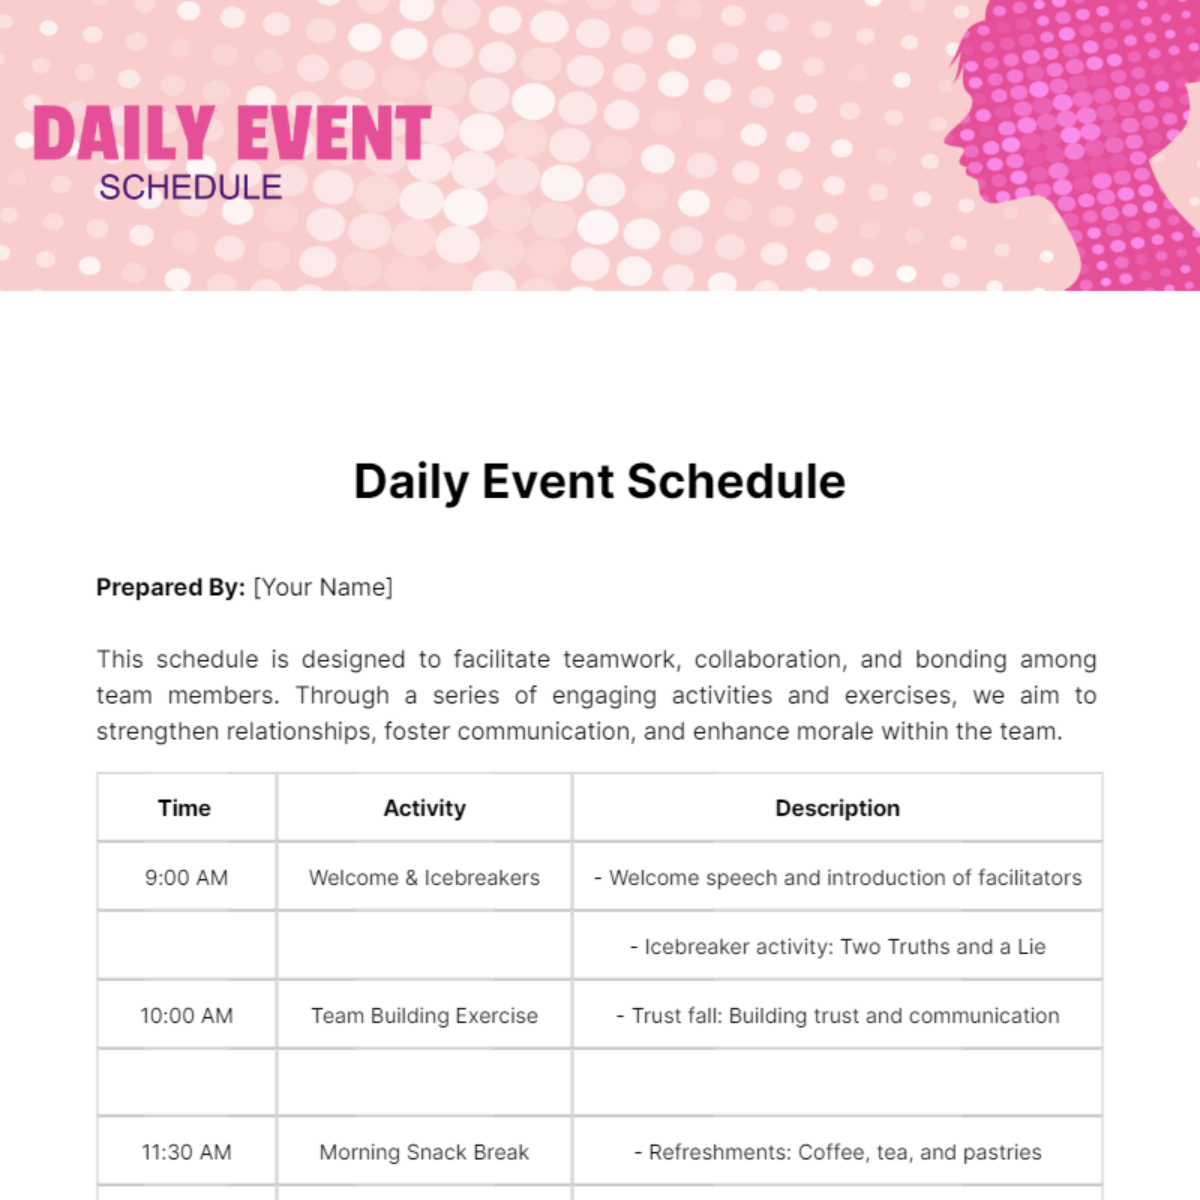 Daily Event Schedule Template